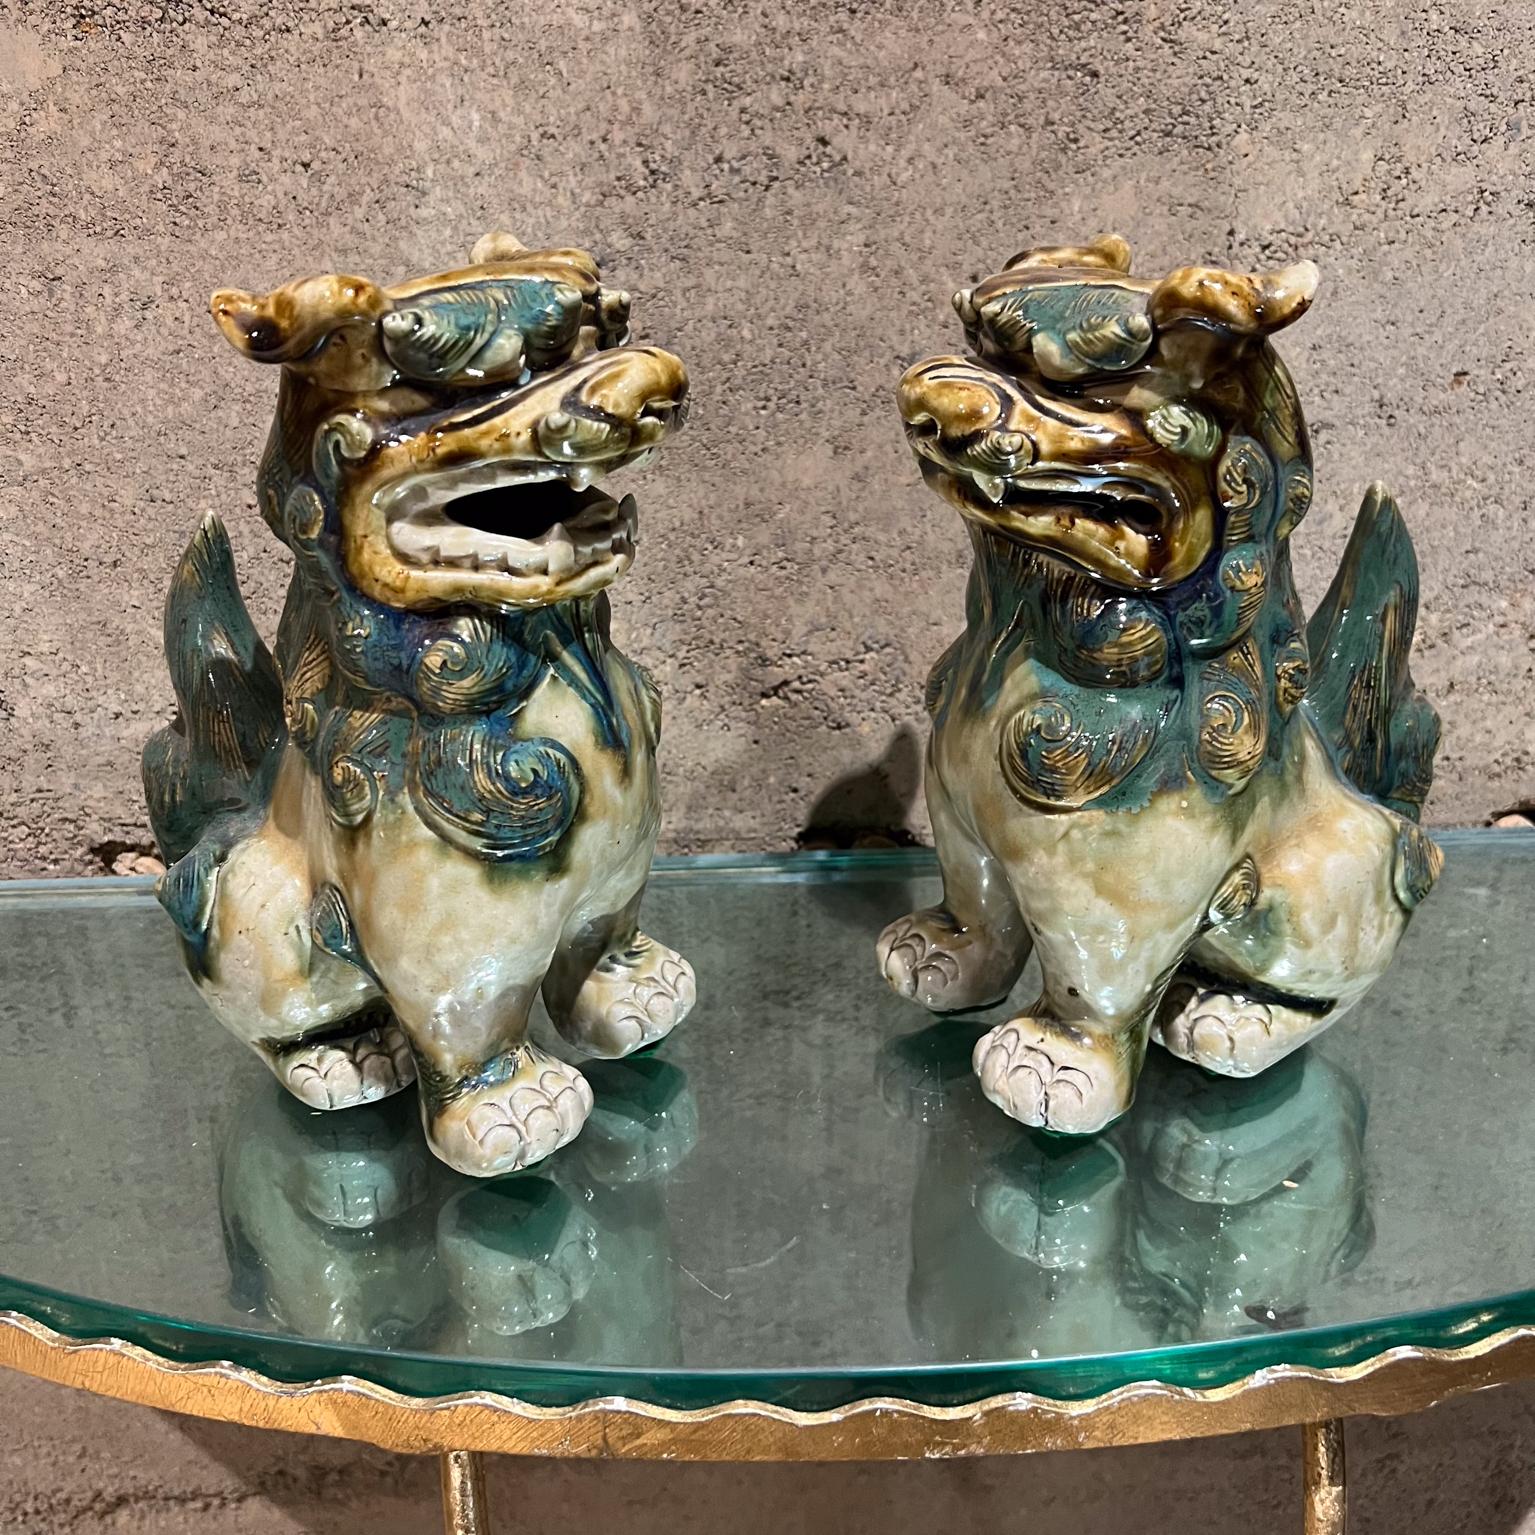 Pair of Antique Chinese Figurines Foo Dog Sculpture
Green Glaze Ceramic
8 tall x 3.75 w x 6.5 d
Preowned original vintage condition.
Refer to images please.